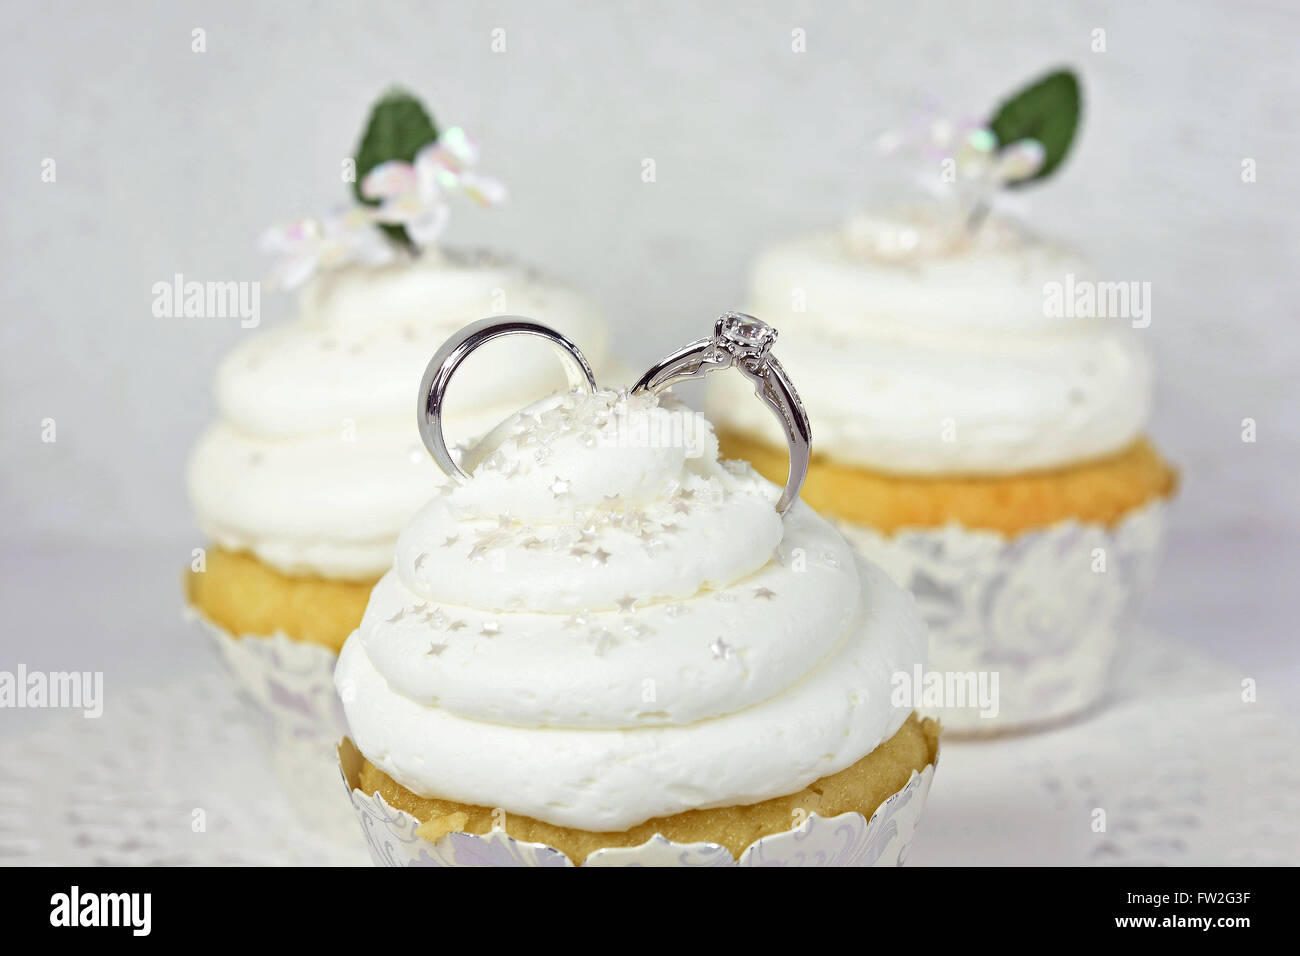 Pair of wedding rings in cupcake frosting with star sprinkles. Stock Photo